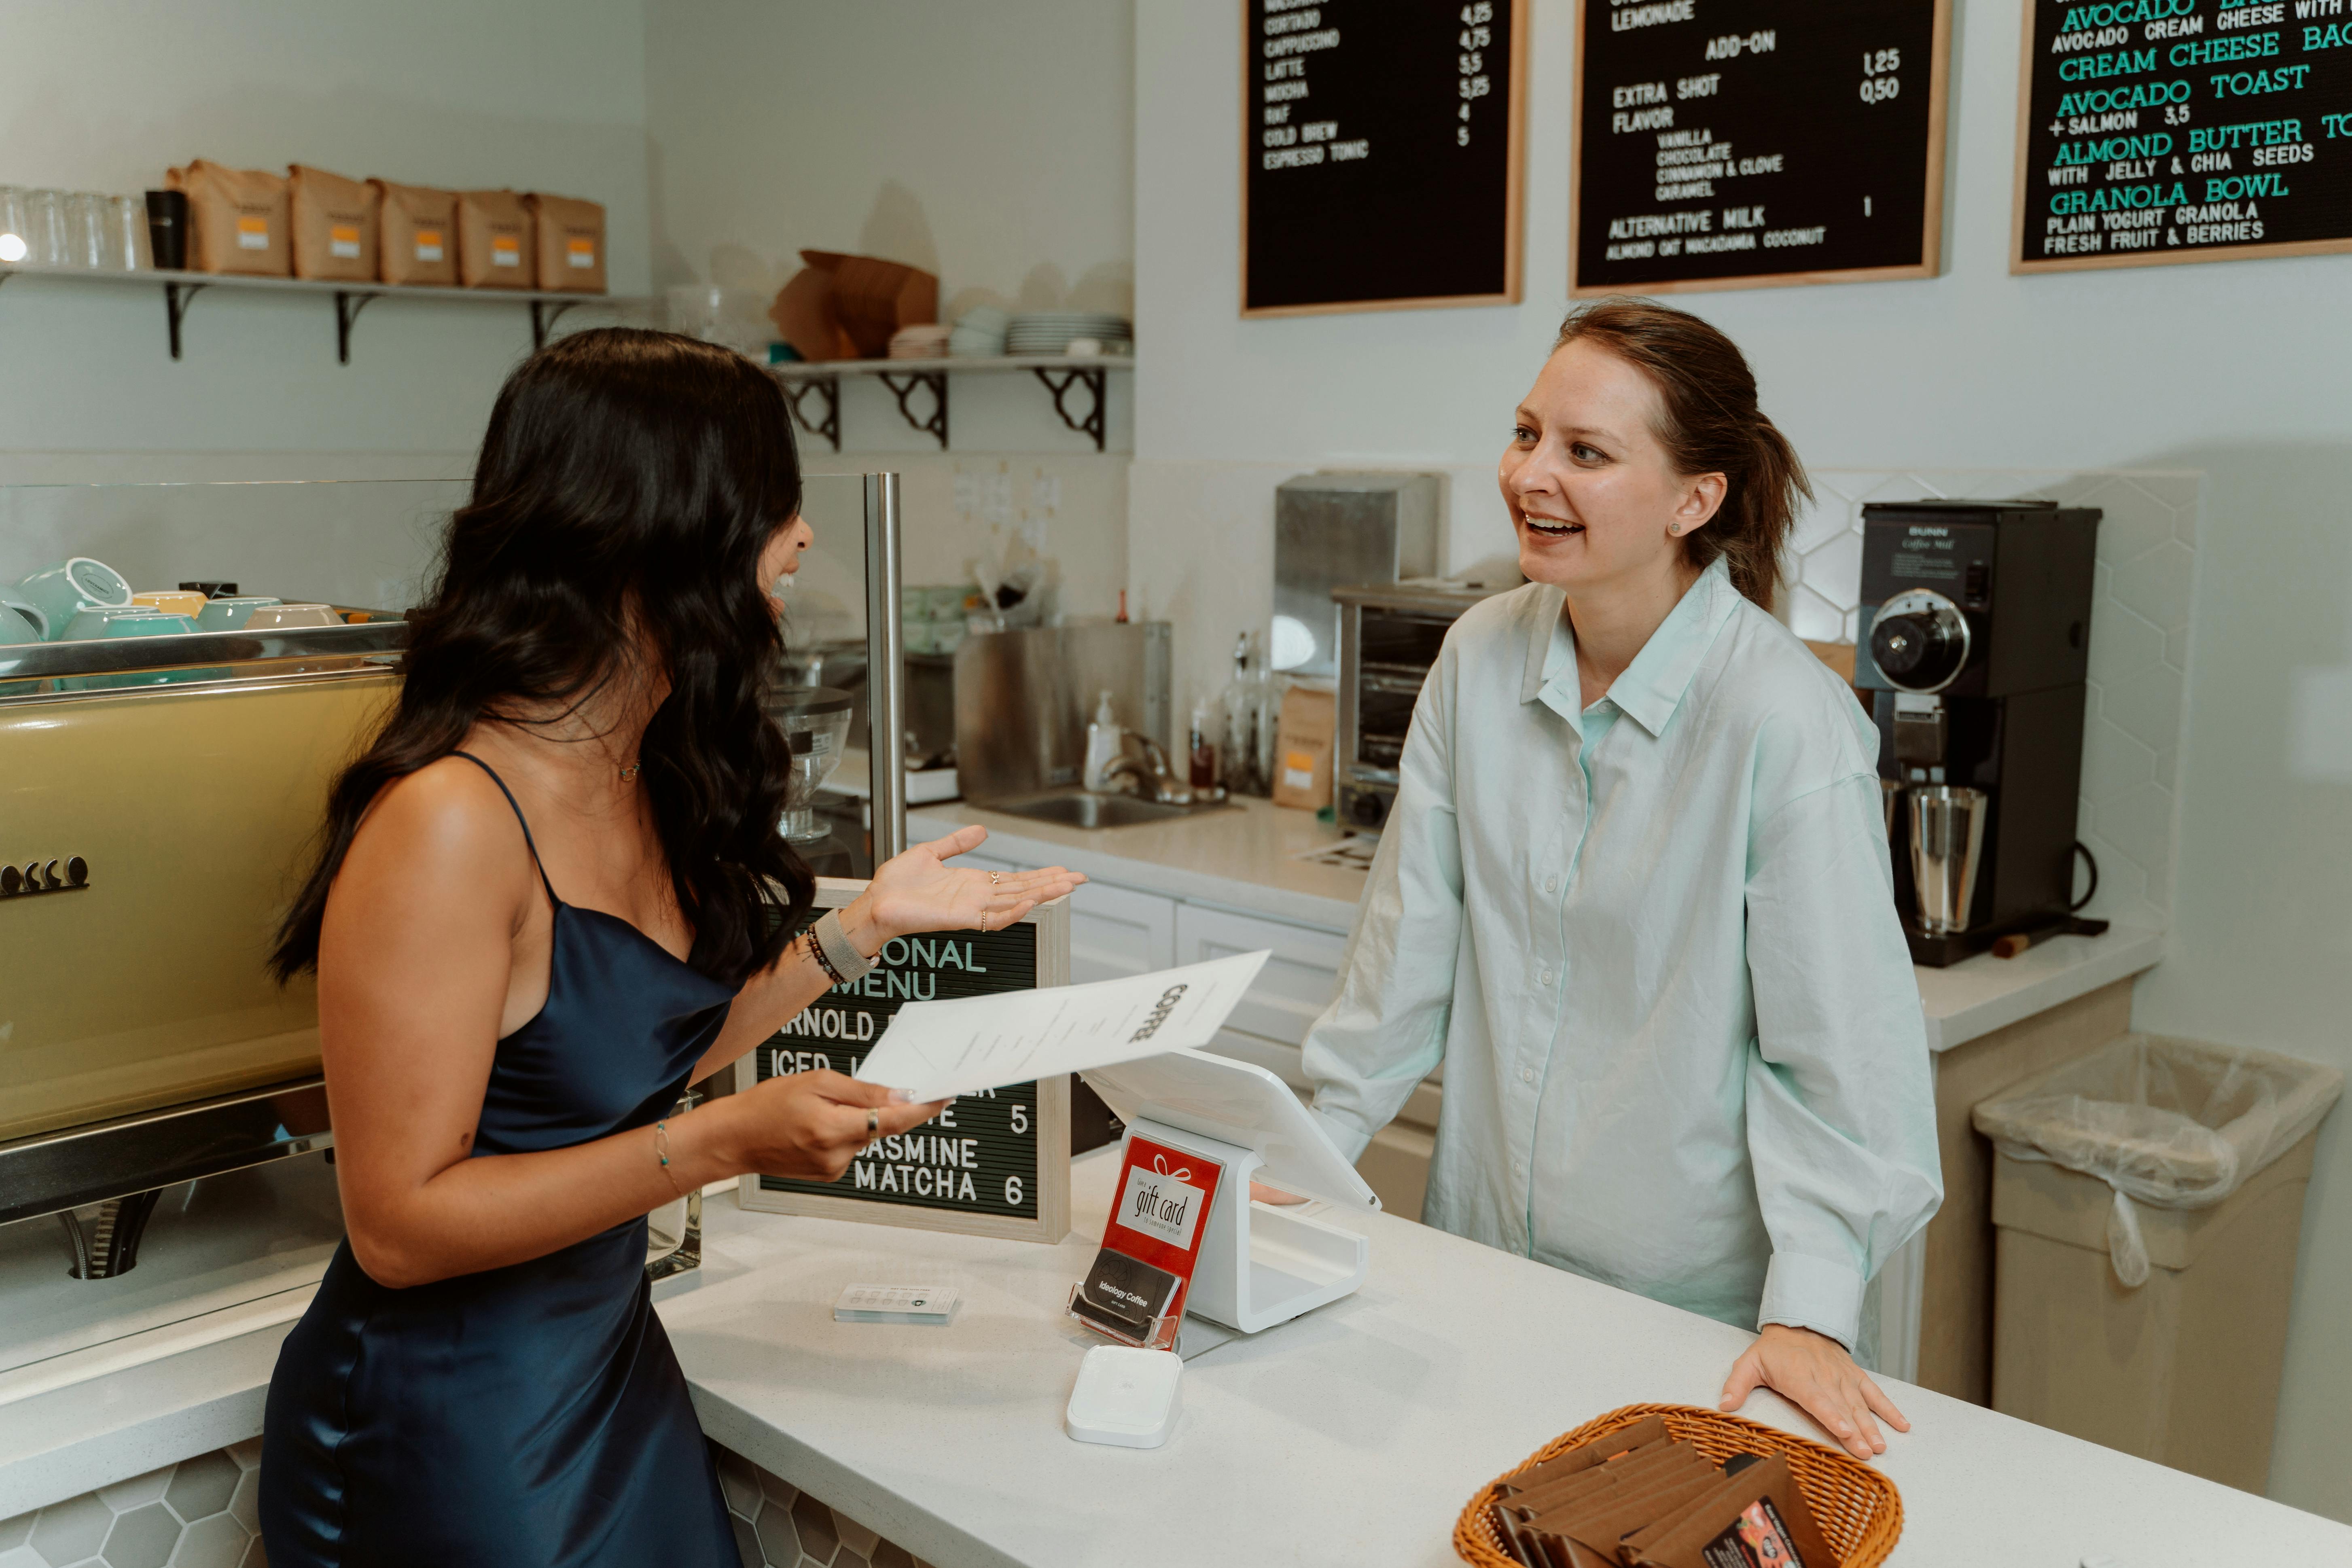 A cashier interacting with a customer | Source: Pexels